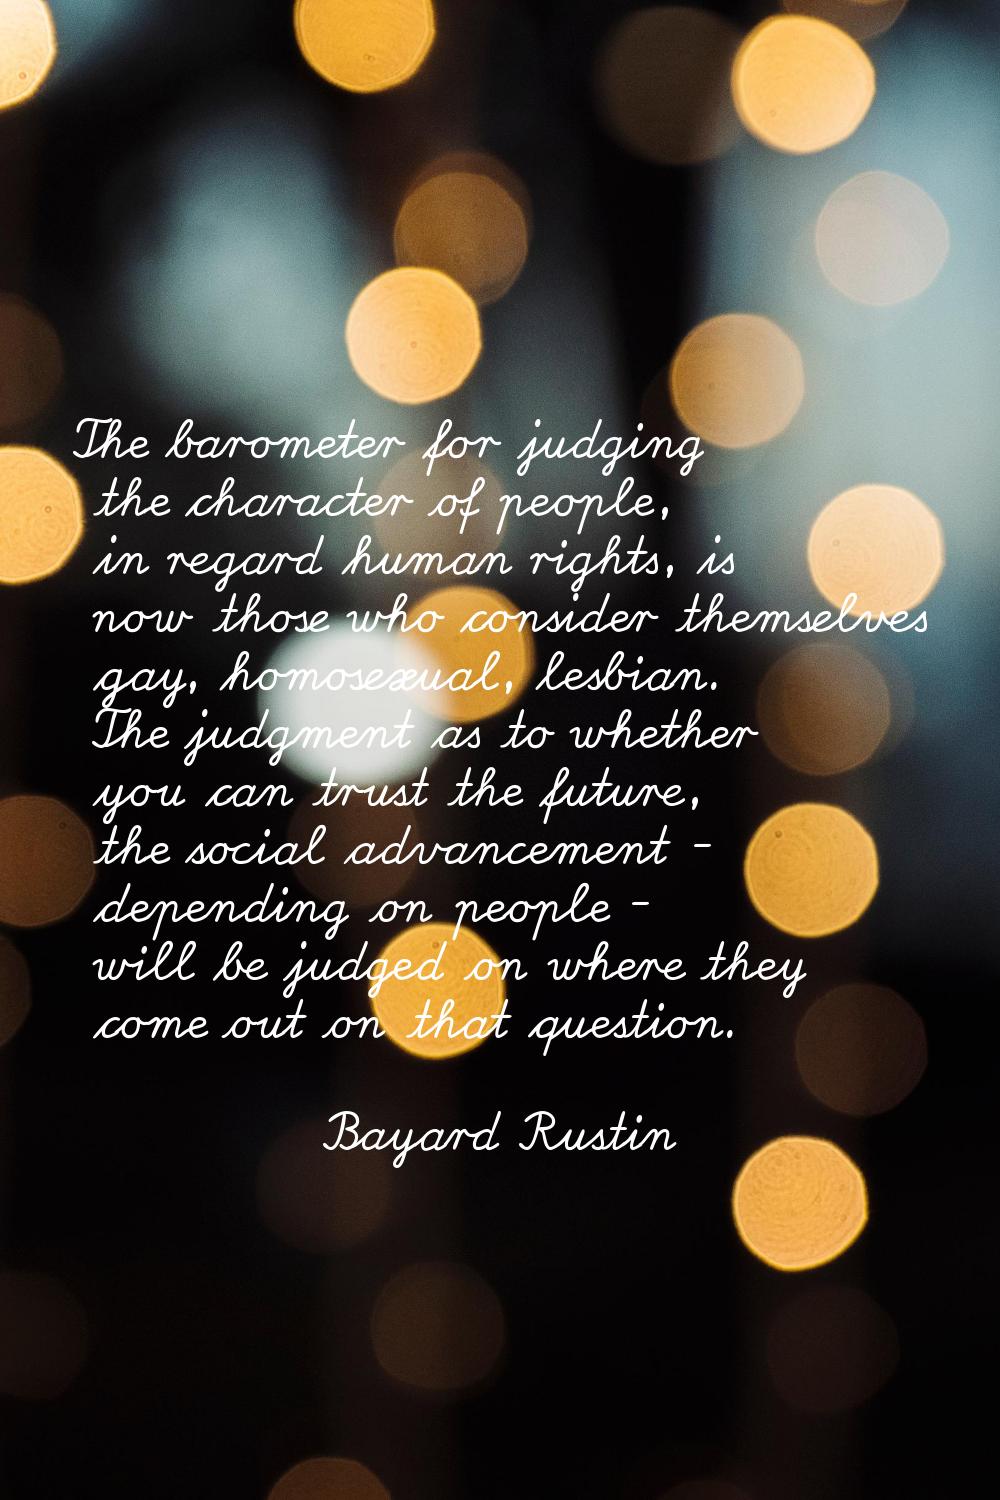 The barometer for judging the character of people, in regard human rights, is now those who conside